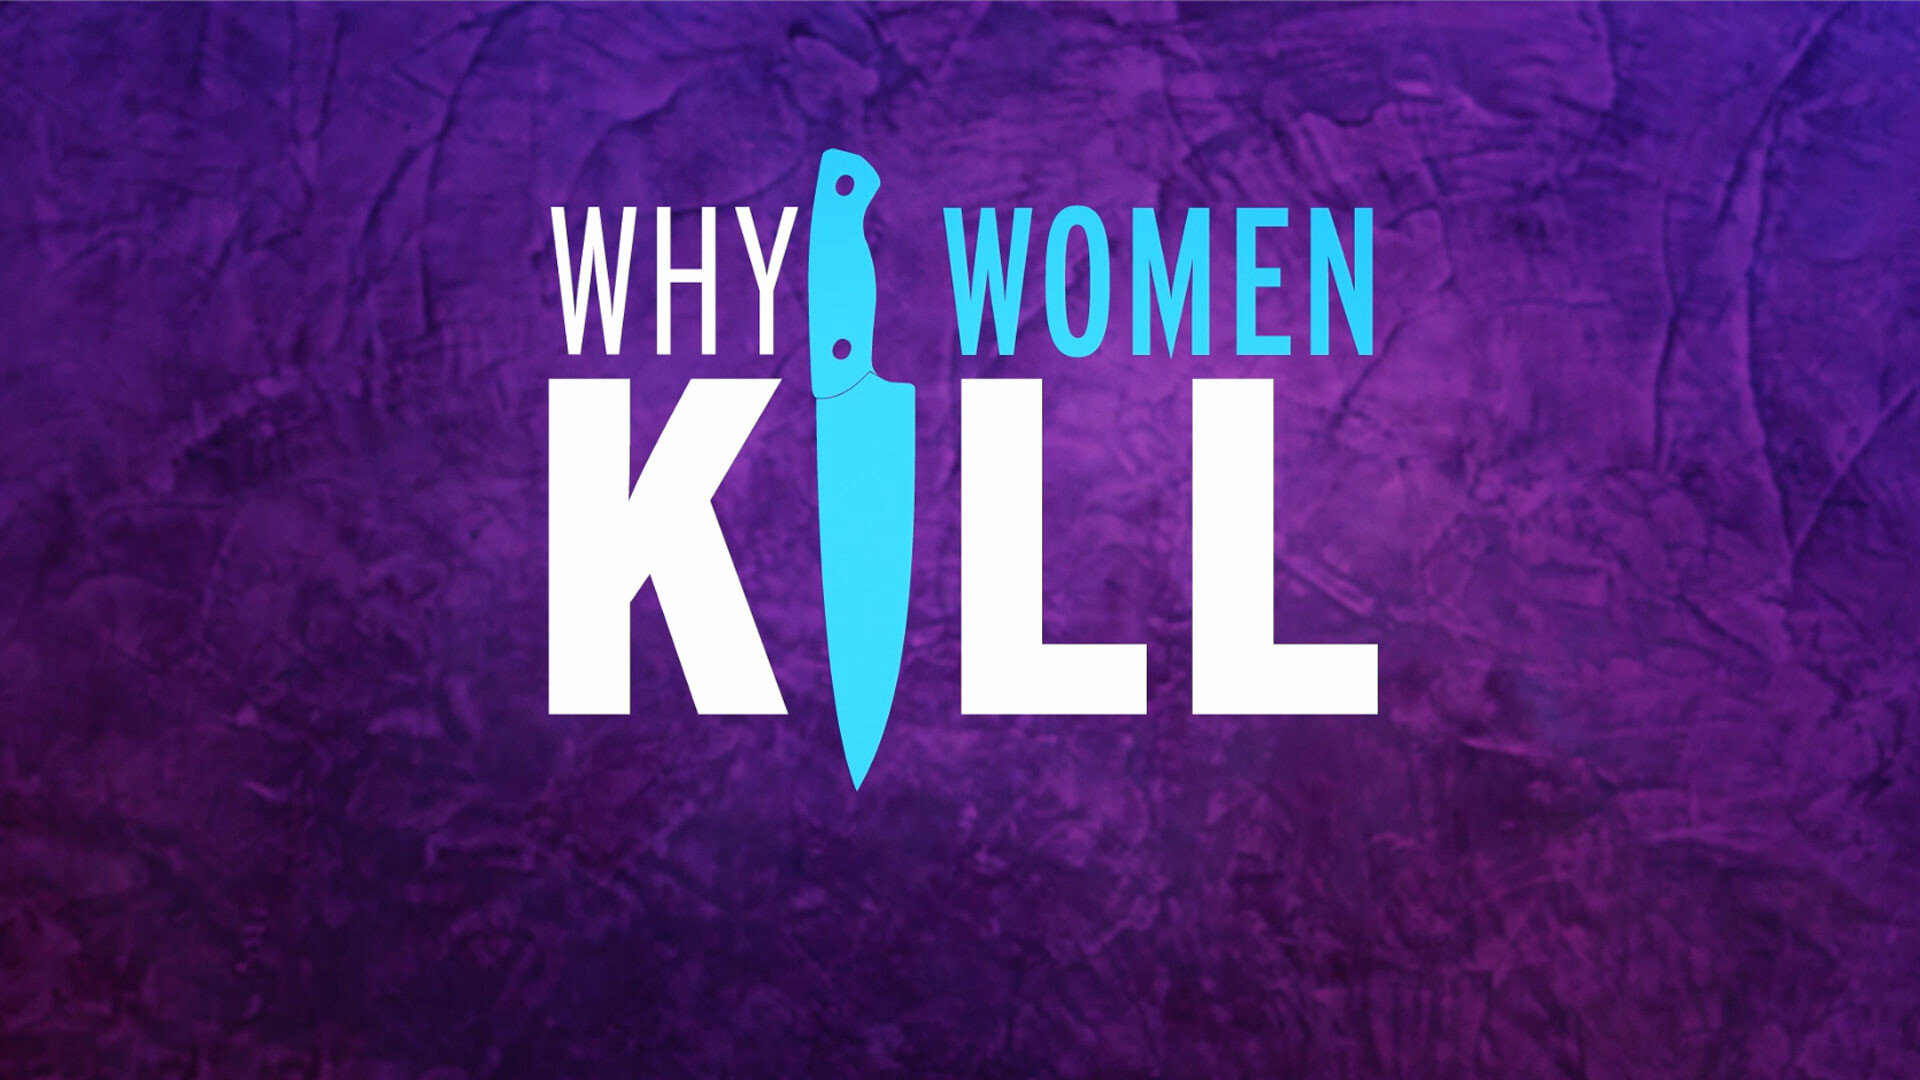 Why Women Kill: The story of a housewife in the '60s, a socialite in the '80s, and a lawyer in 2019. 1920x1080 Full HD Wallpaper.